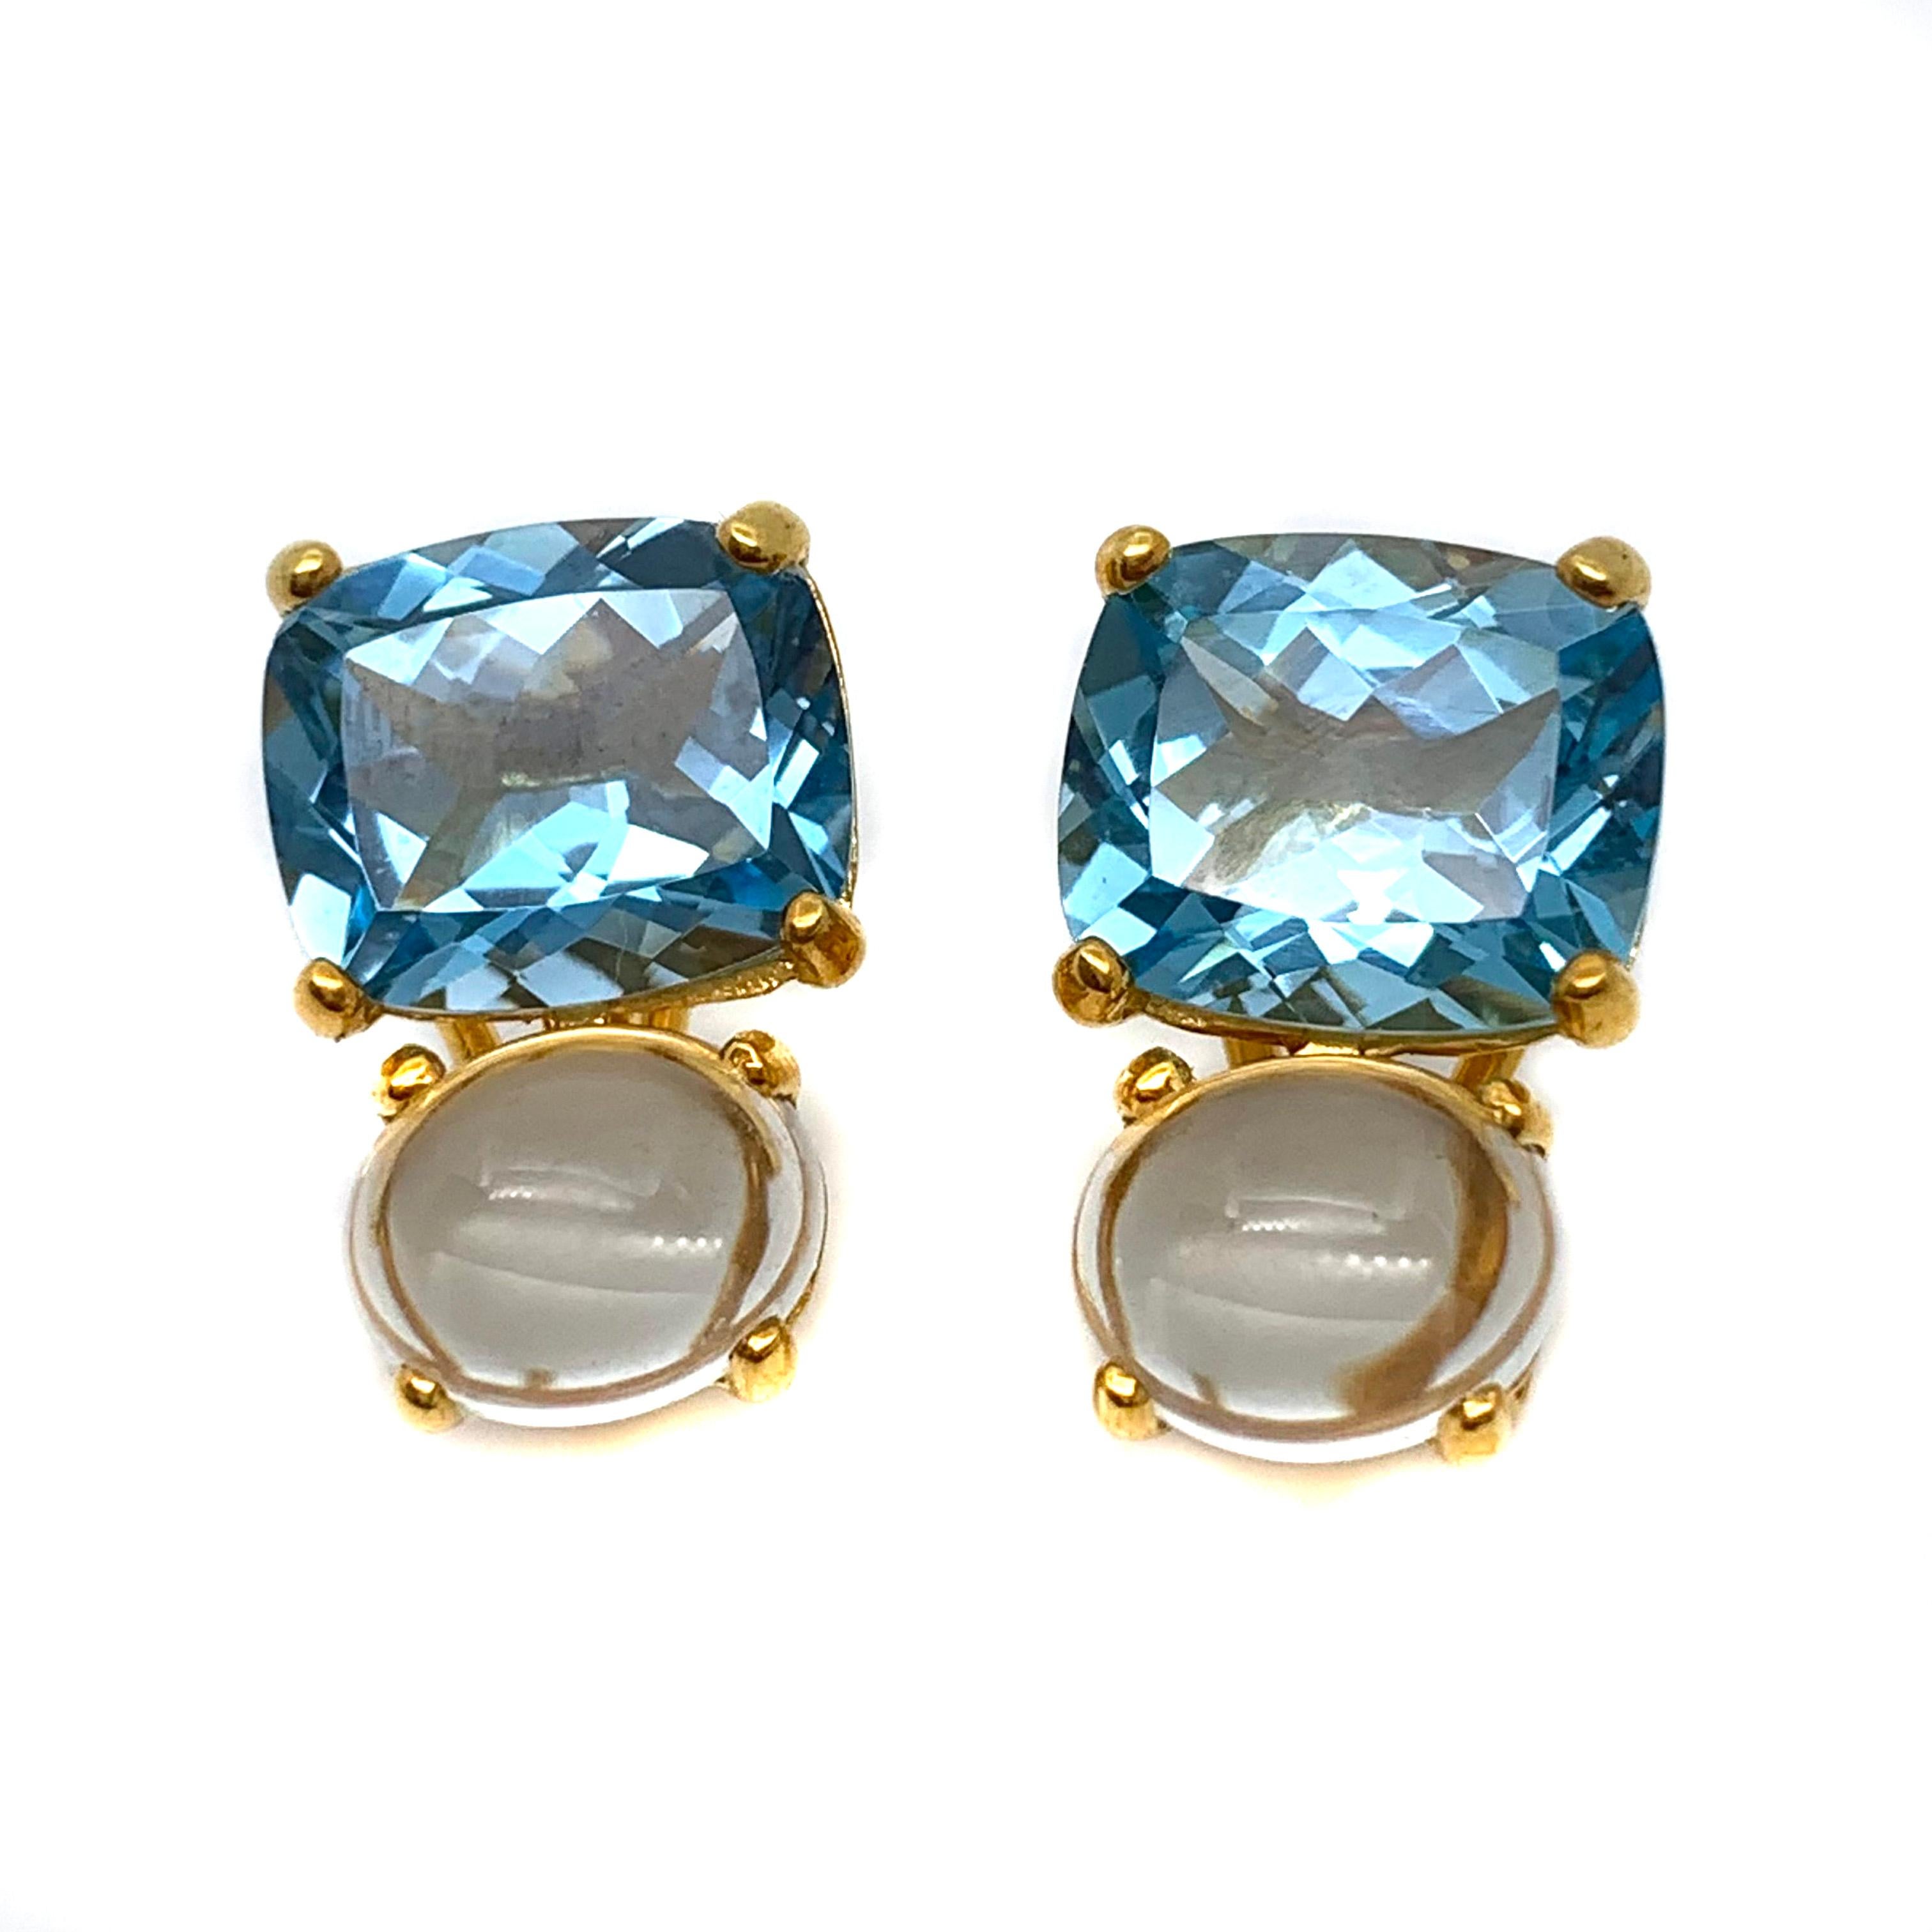 These stunning pair of earrings features a pair of genuine cushion-cut sky blue topaz with crystal clear cabochon-cut oval prasiolite, handset in 18k yellow gold vermeil over sterling silver. The facet and cabochon combination creates beautiful